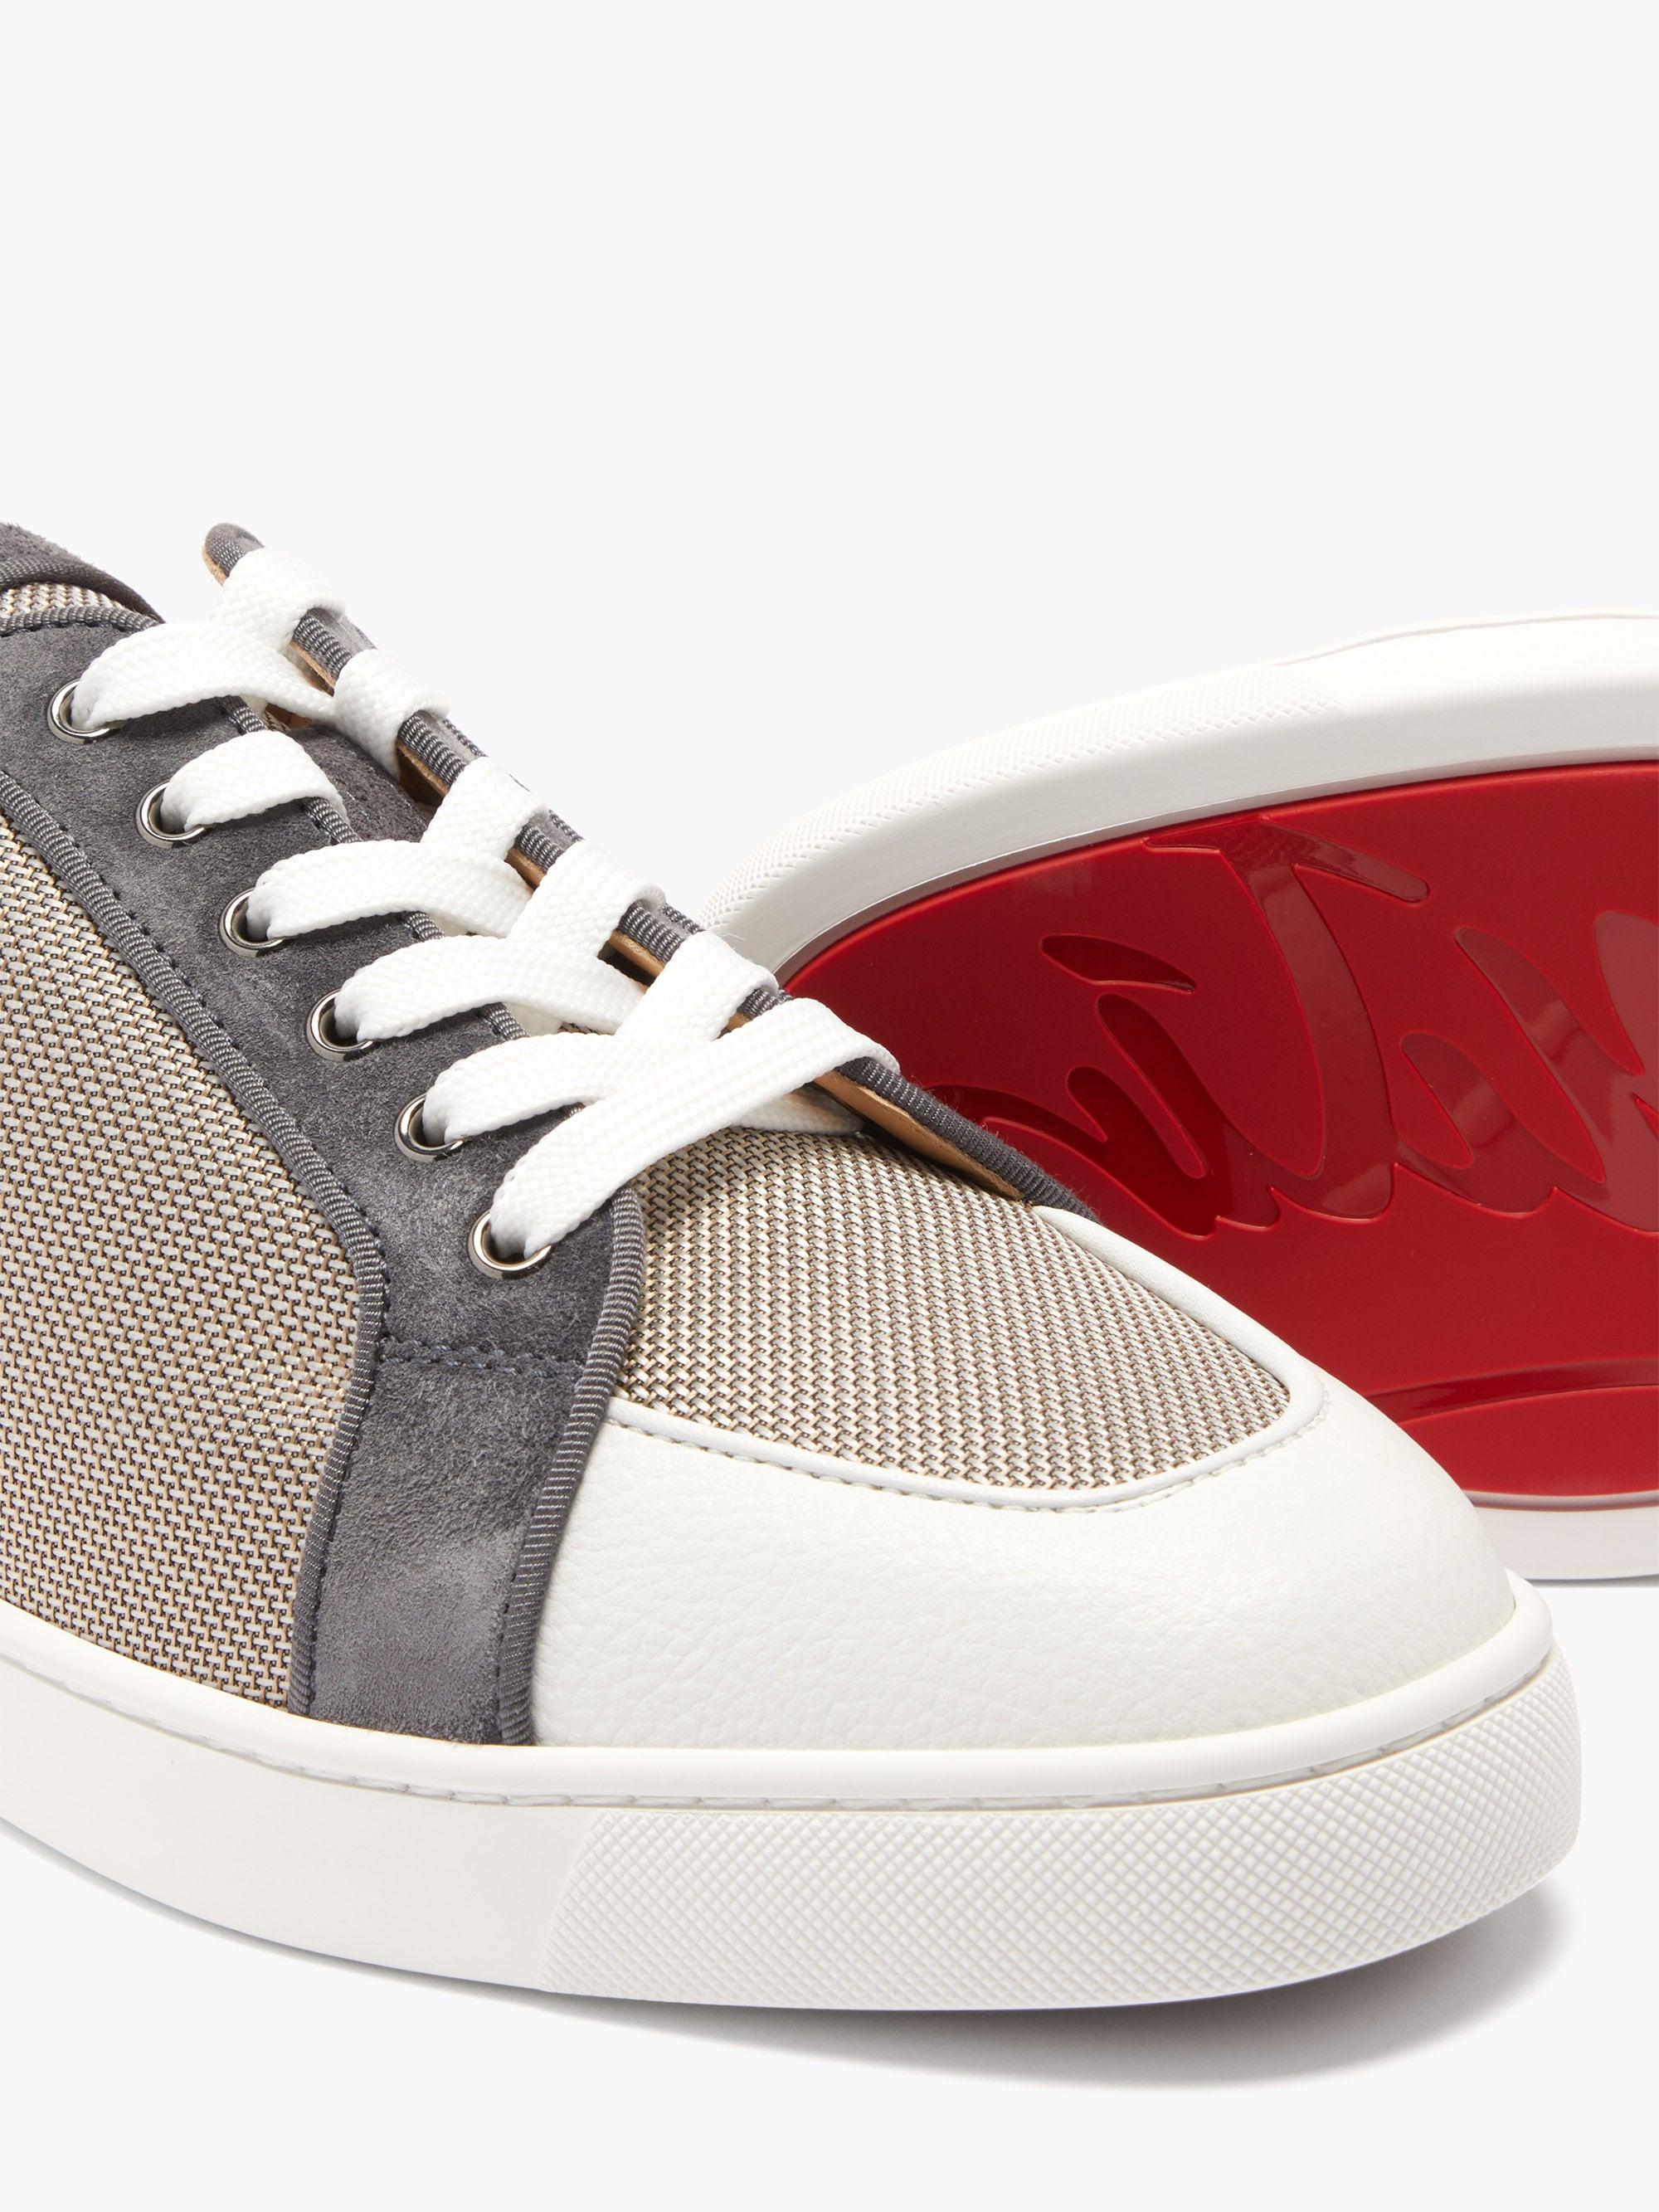 Christian Louboutin Men's Rantulow Red Sole Leather Low-Top Sneakers